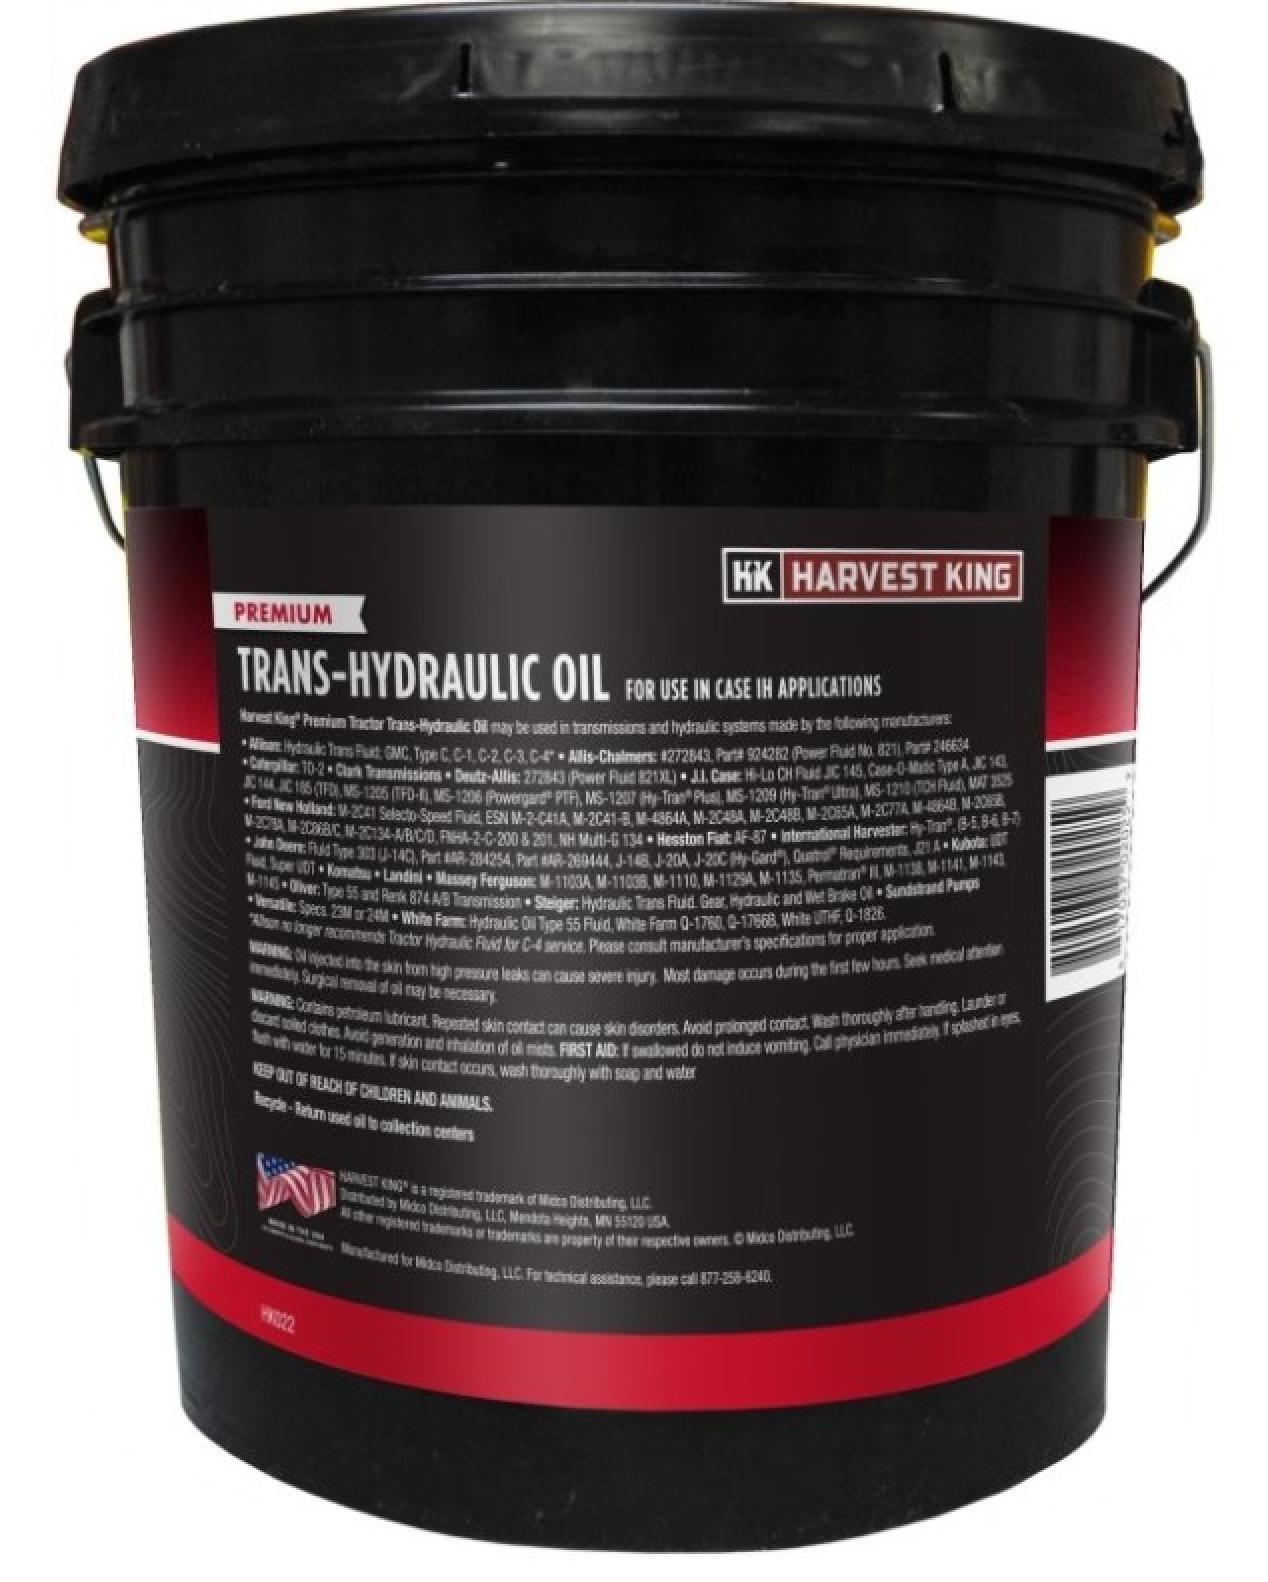 Harvest King Trans-Hydraulic Oil for Case IH